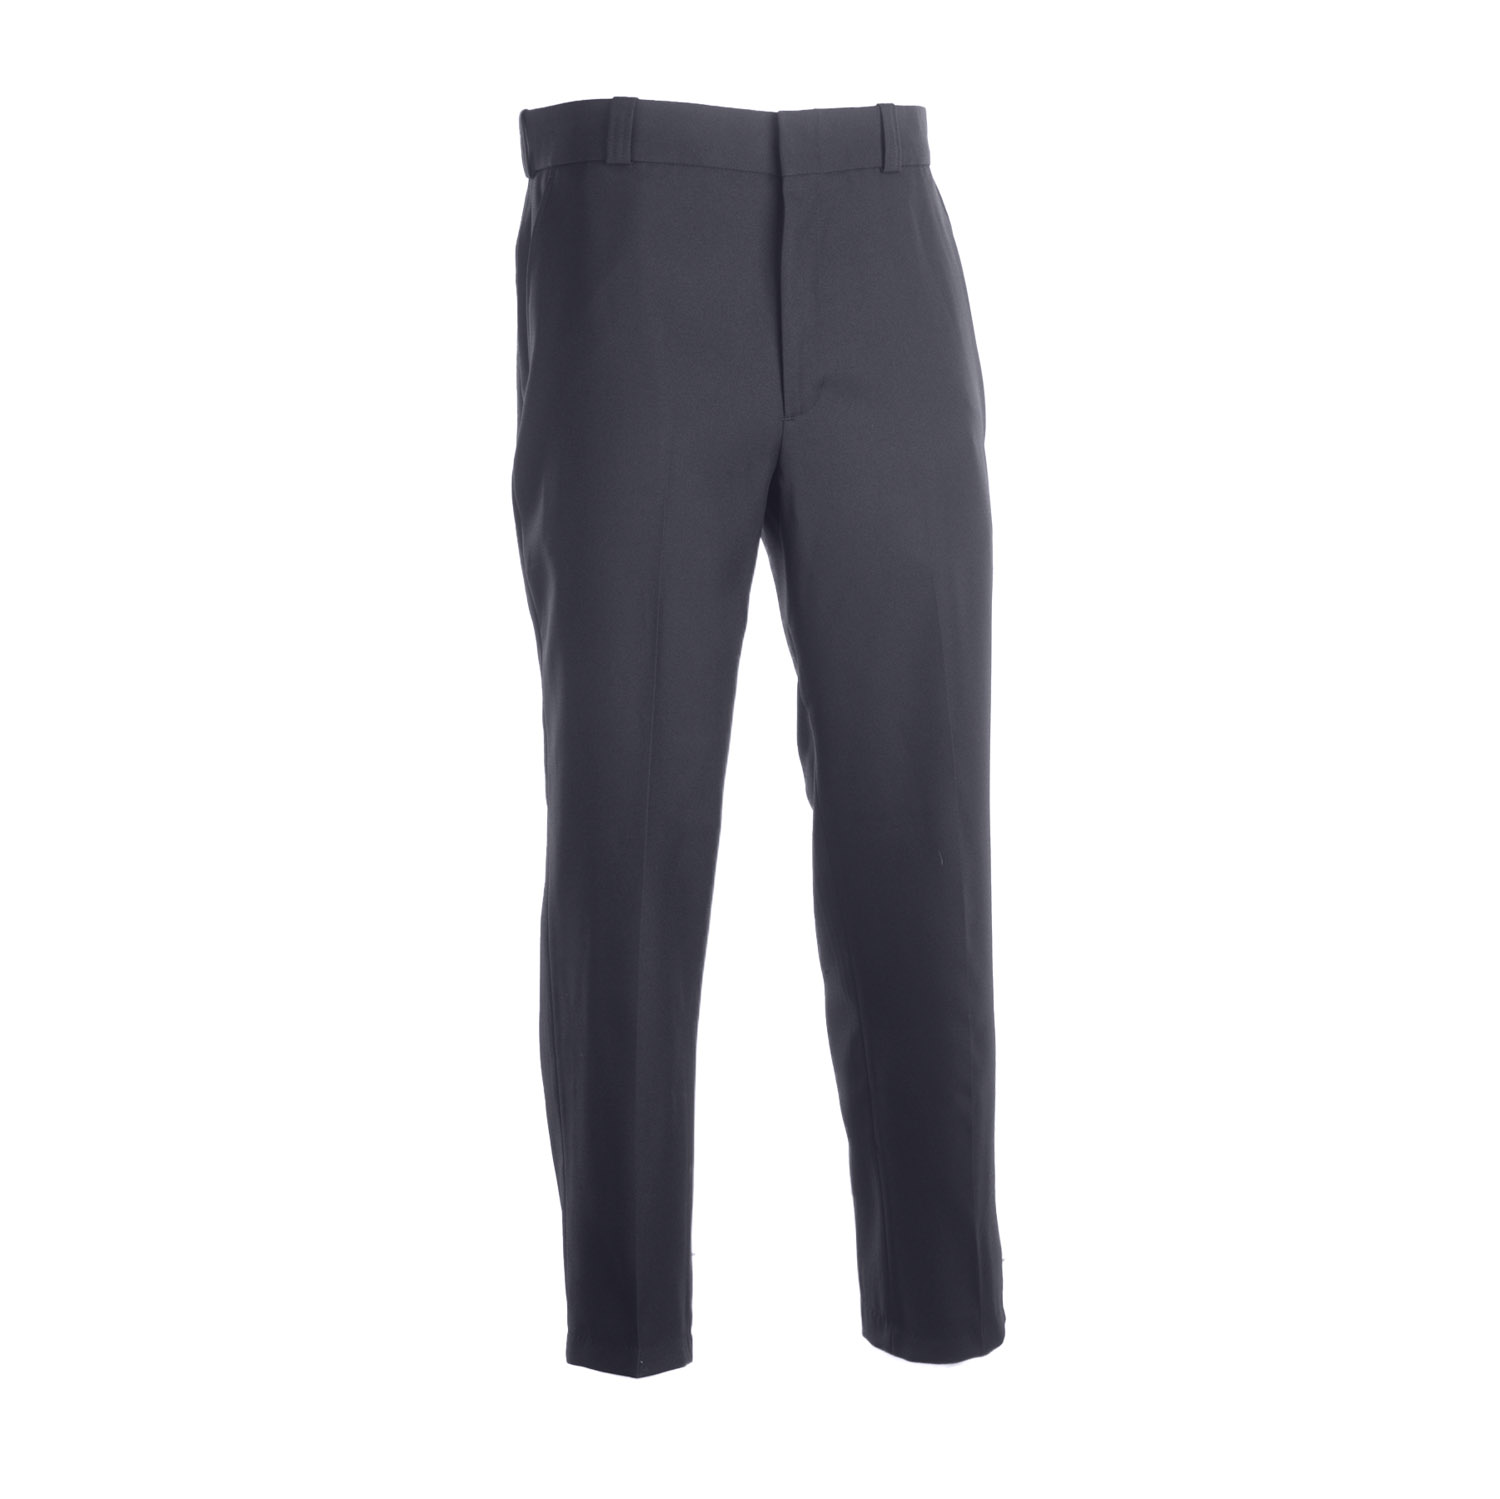 NAVY YEAR ROUND 100% POLYESTER TROUSER